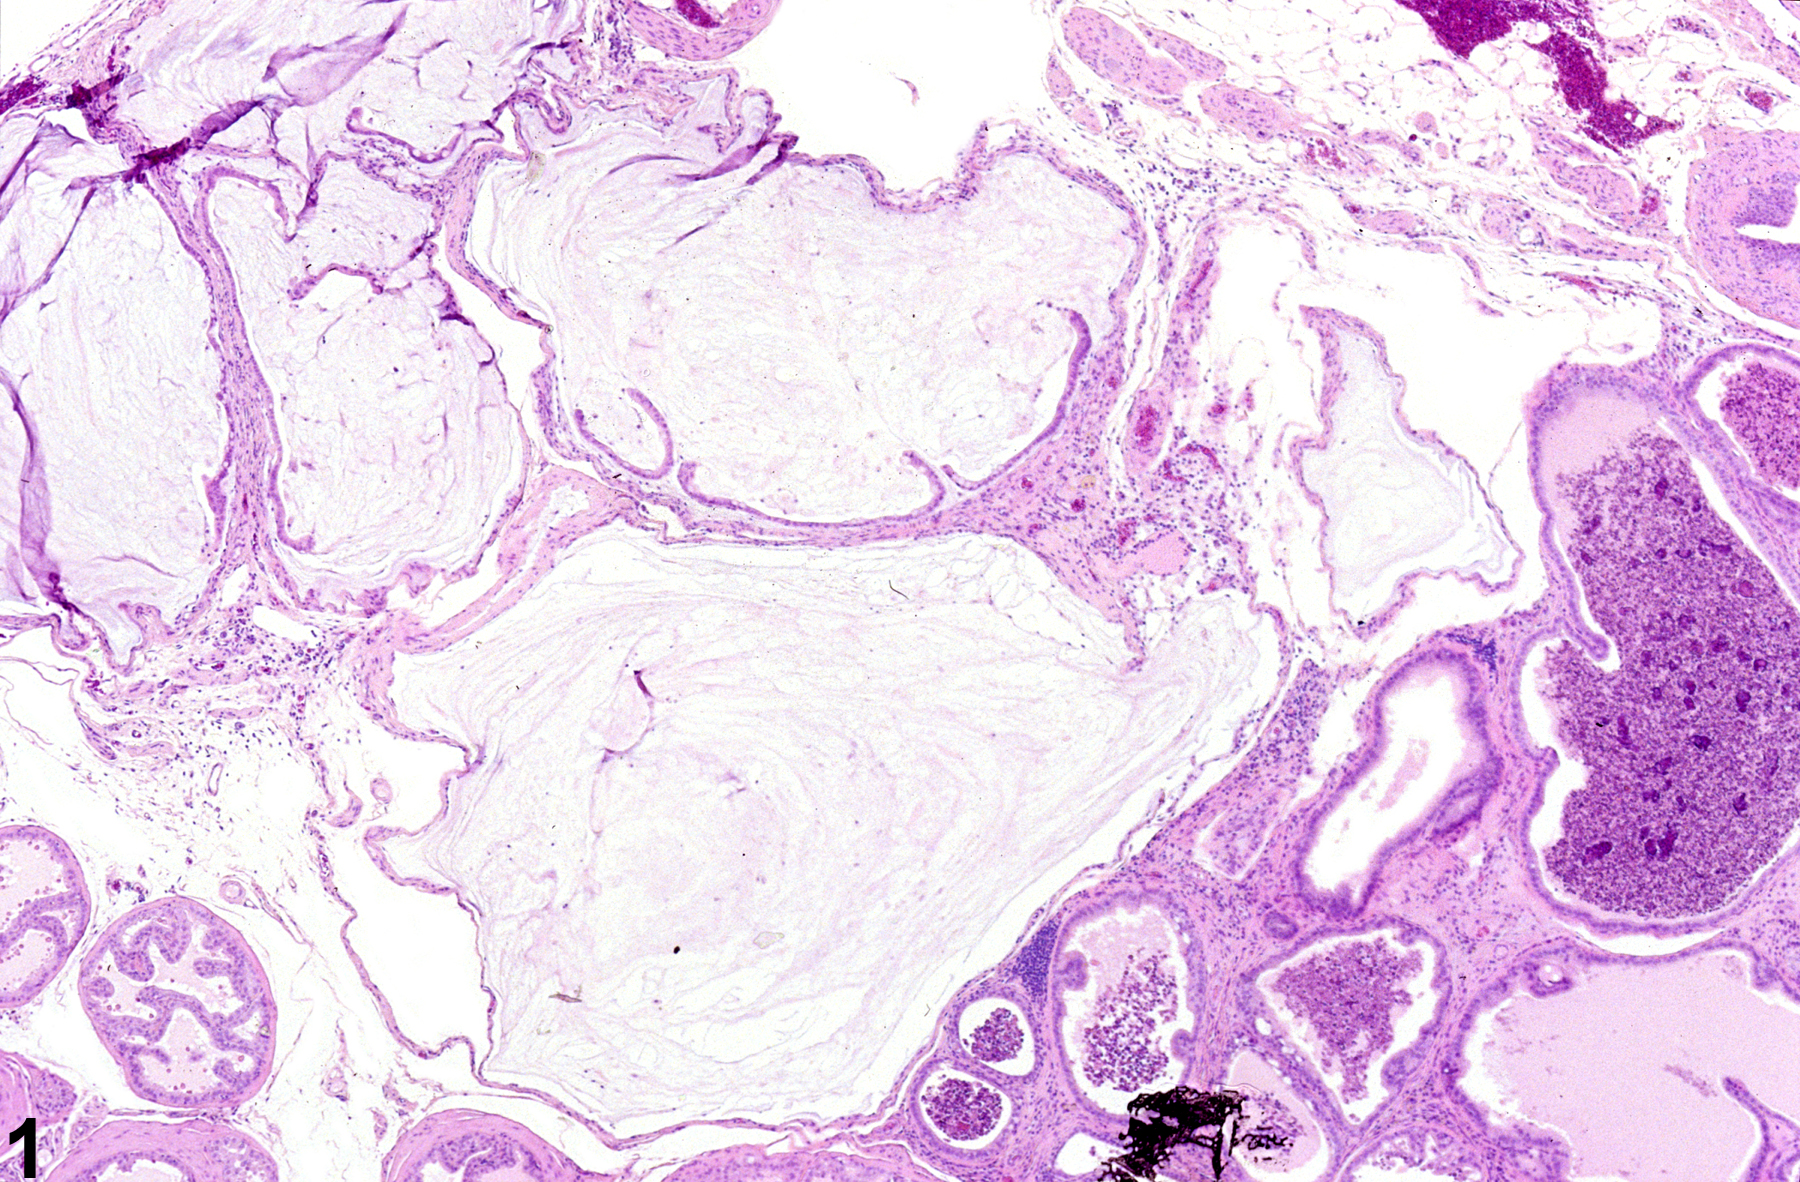 Image of acinar mucinous cyst in the prostate from a male F344/N rat in a chronic study